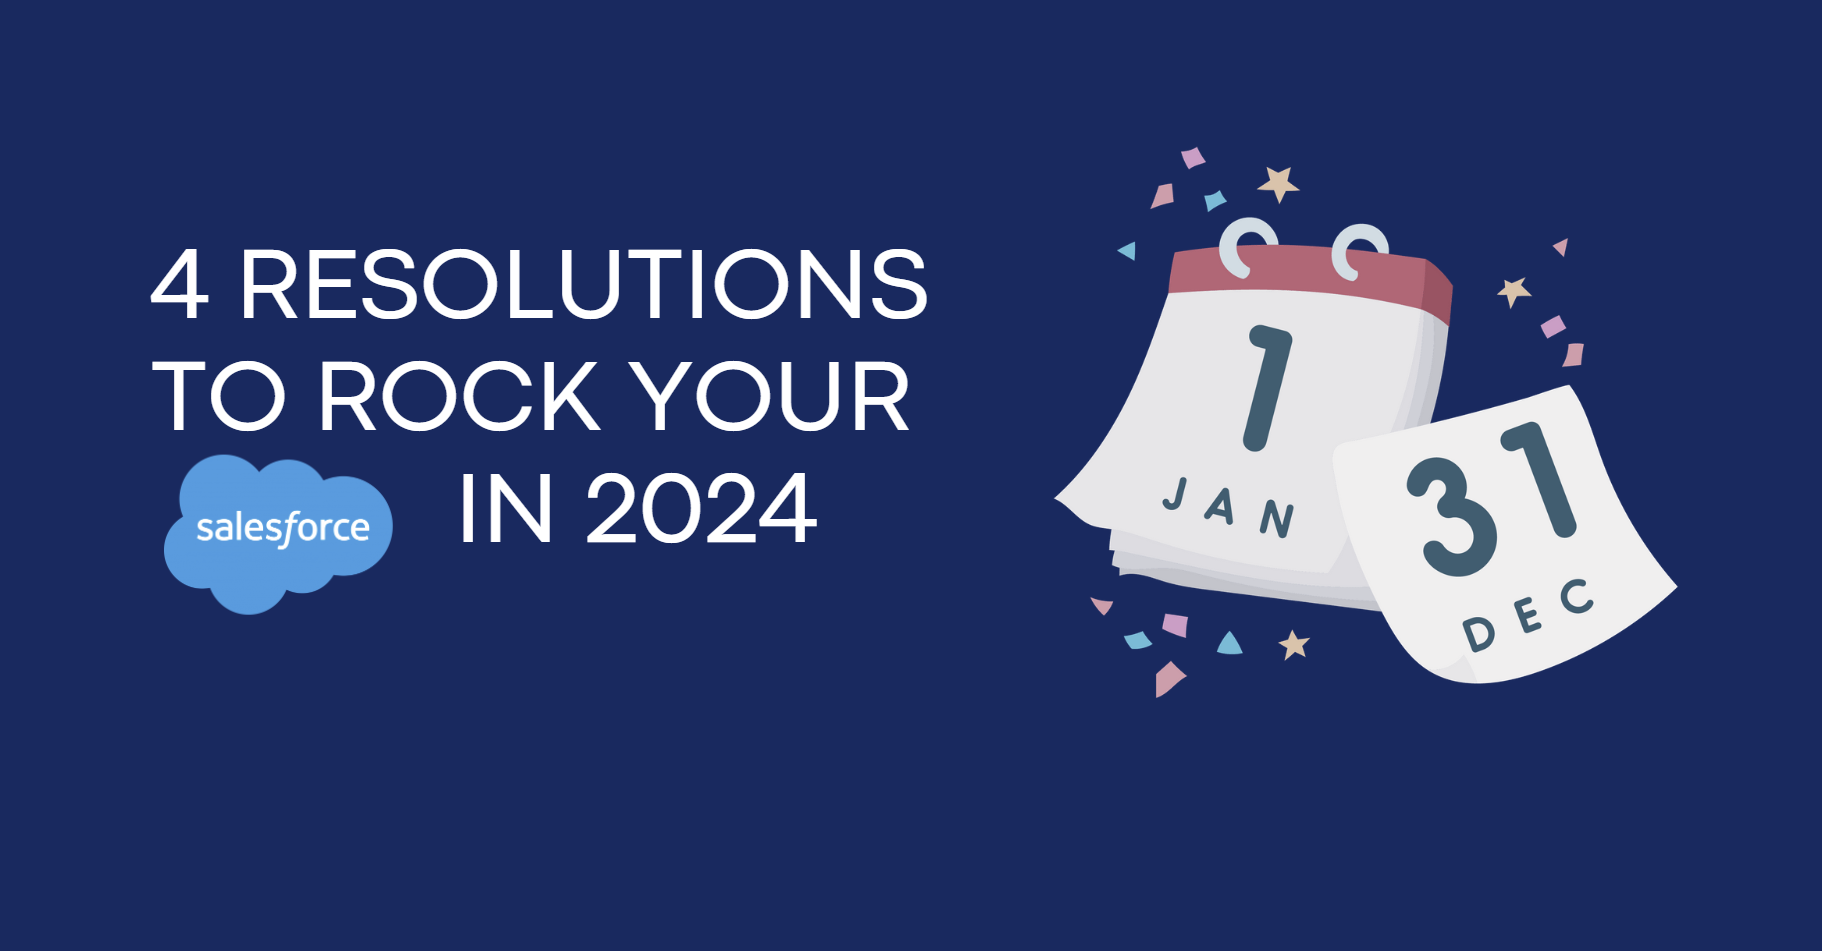 4 Resolutions to Rock Your Salesforce in 2024